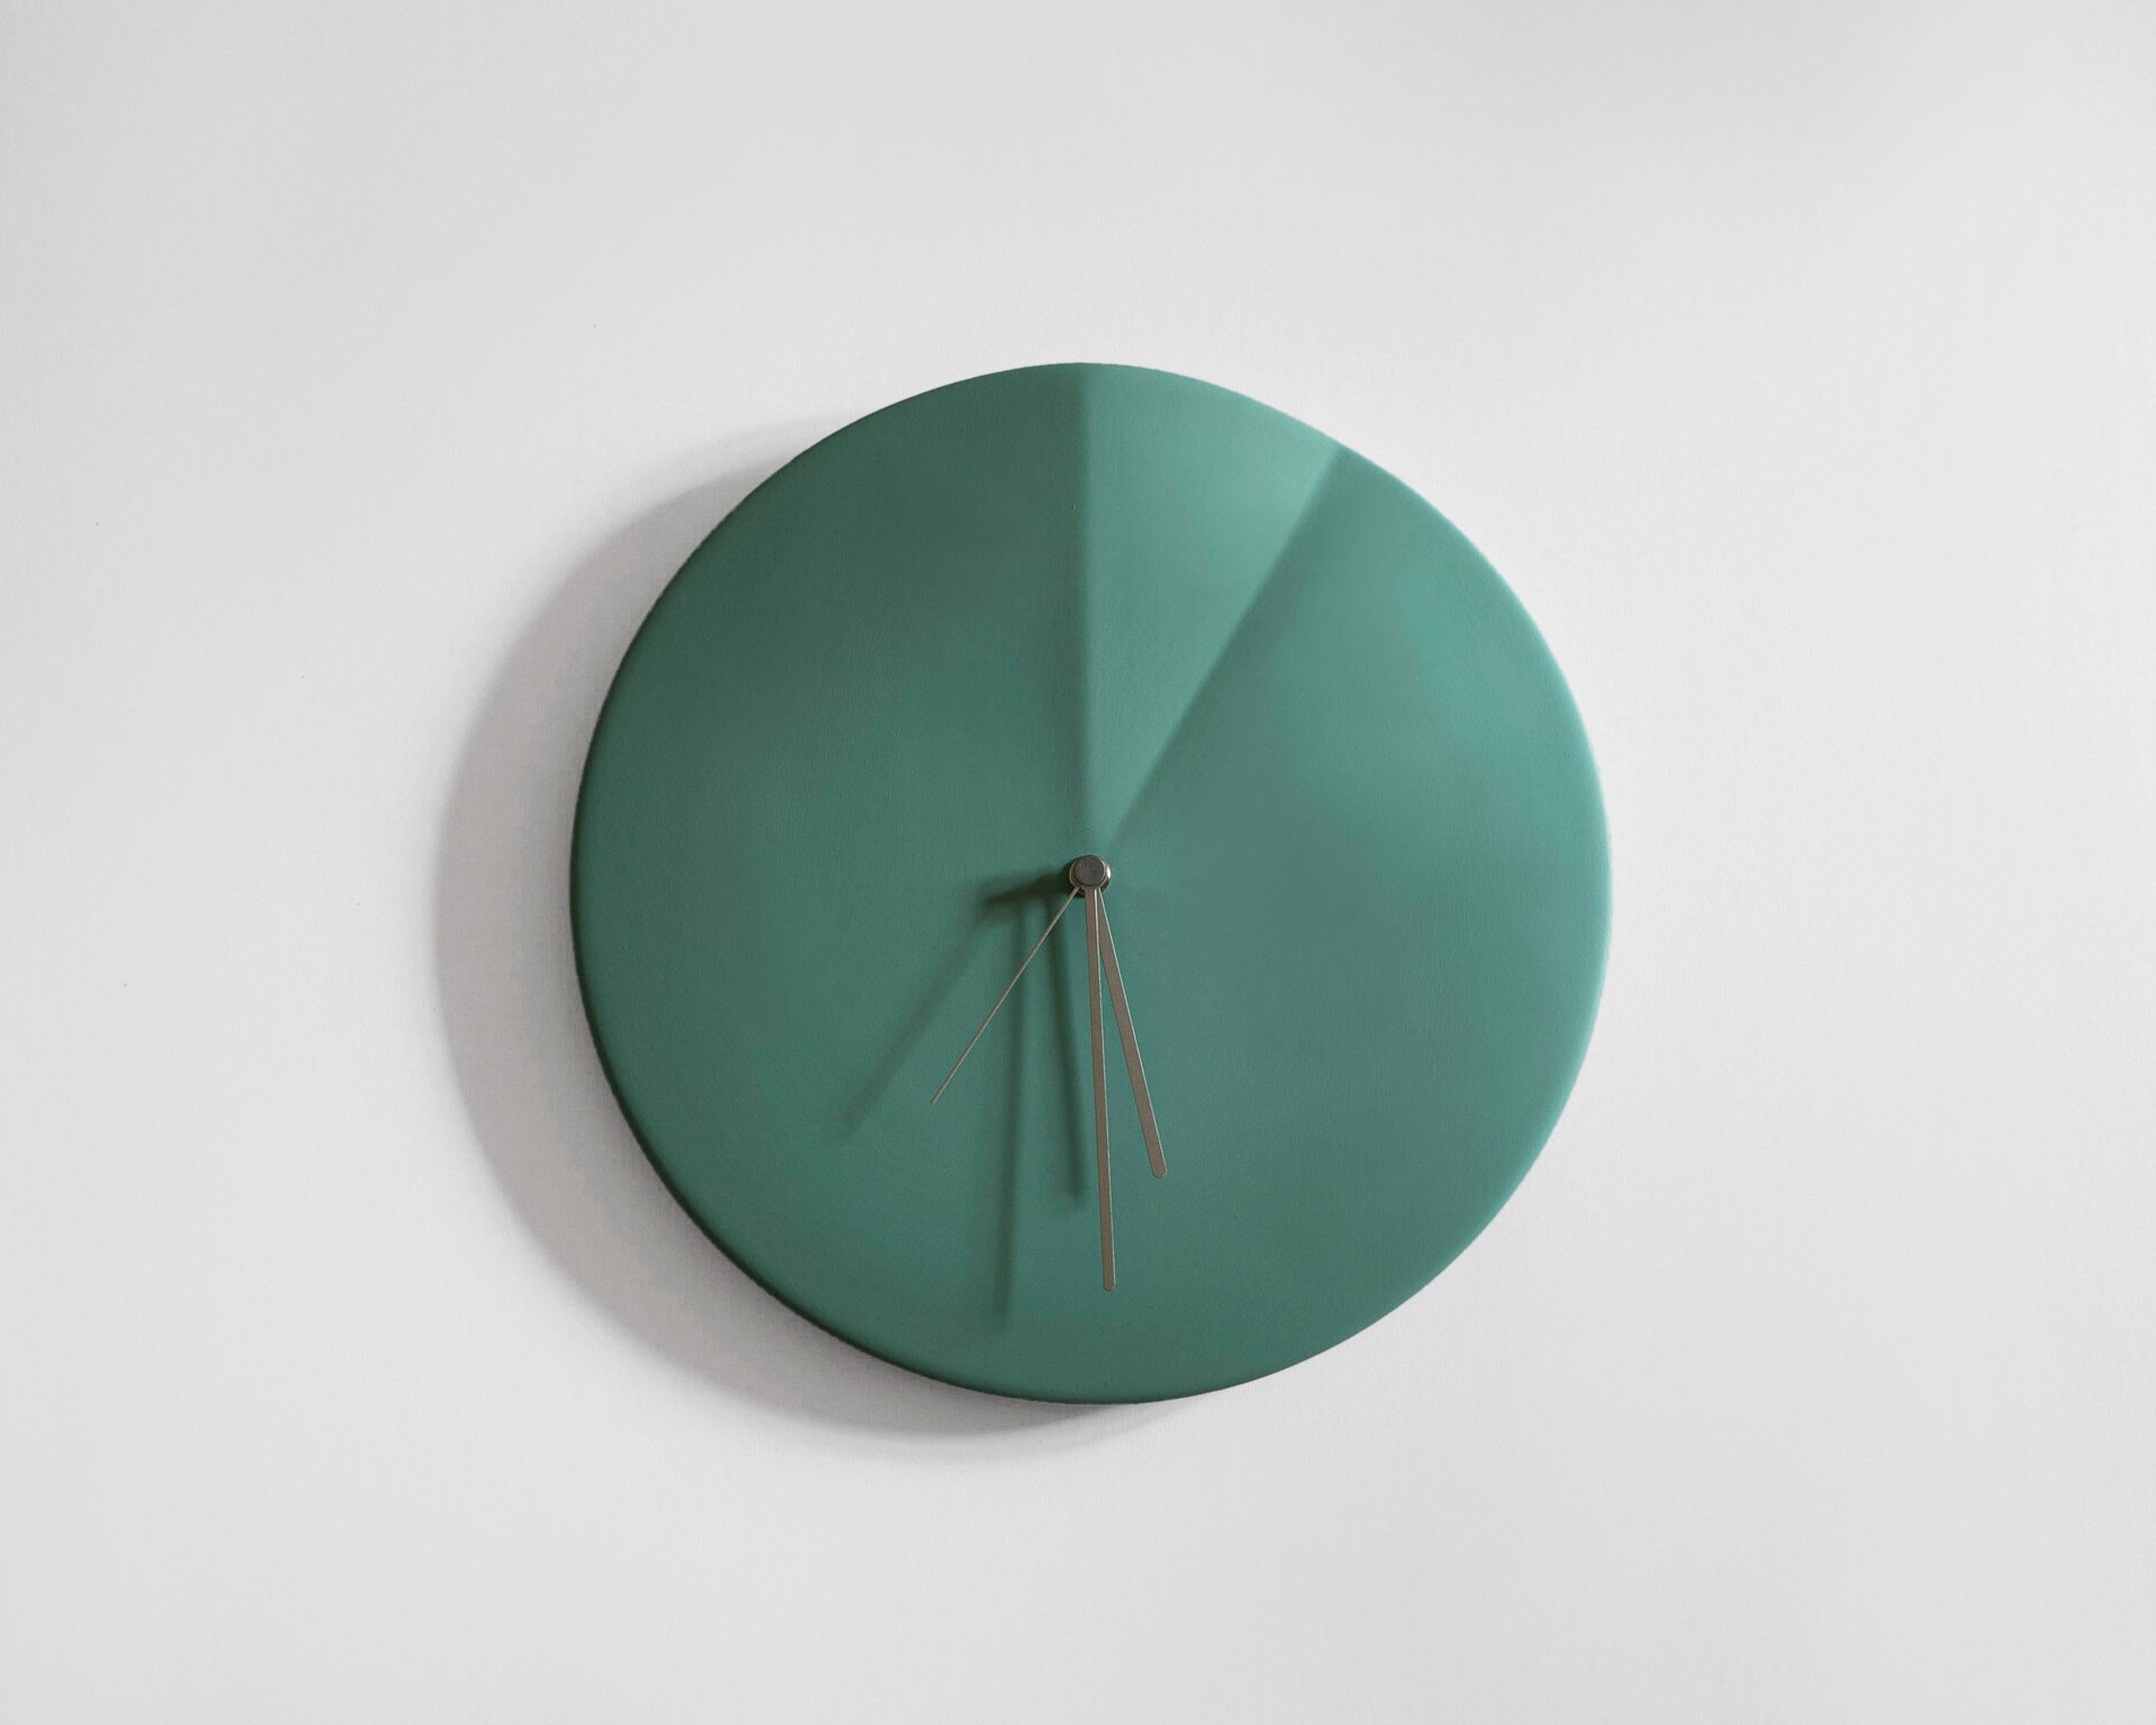 Oree
Wall clock signed by Ocrùm 

Dimensions: 11.75 x 1.5 in
Materials: Painted ceramic, aluminum hands
Colors: 
Cream White / Wine Red / Light Blue / Granite Blue / Light Grey / Antique Pink 
Hands: Copper / Grey
Movement:
Silent